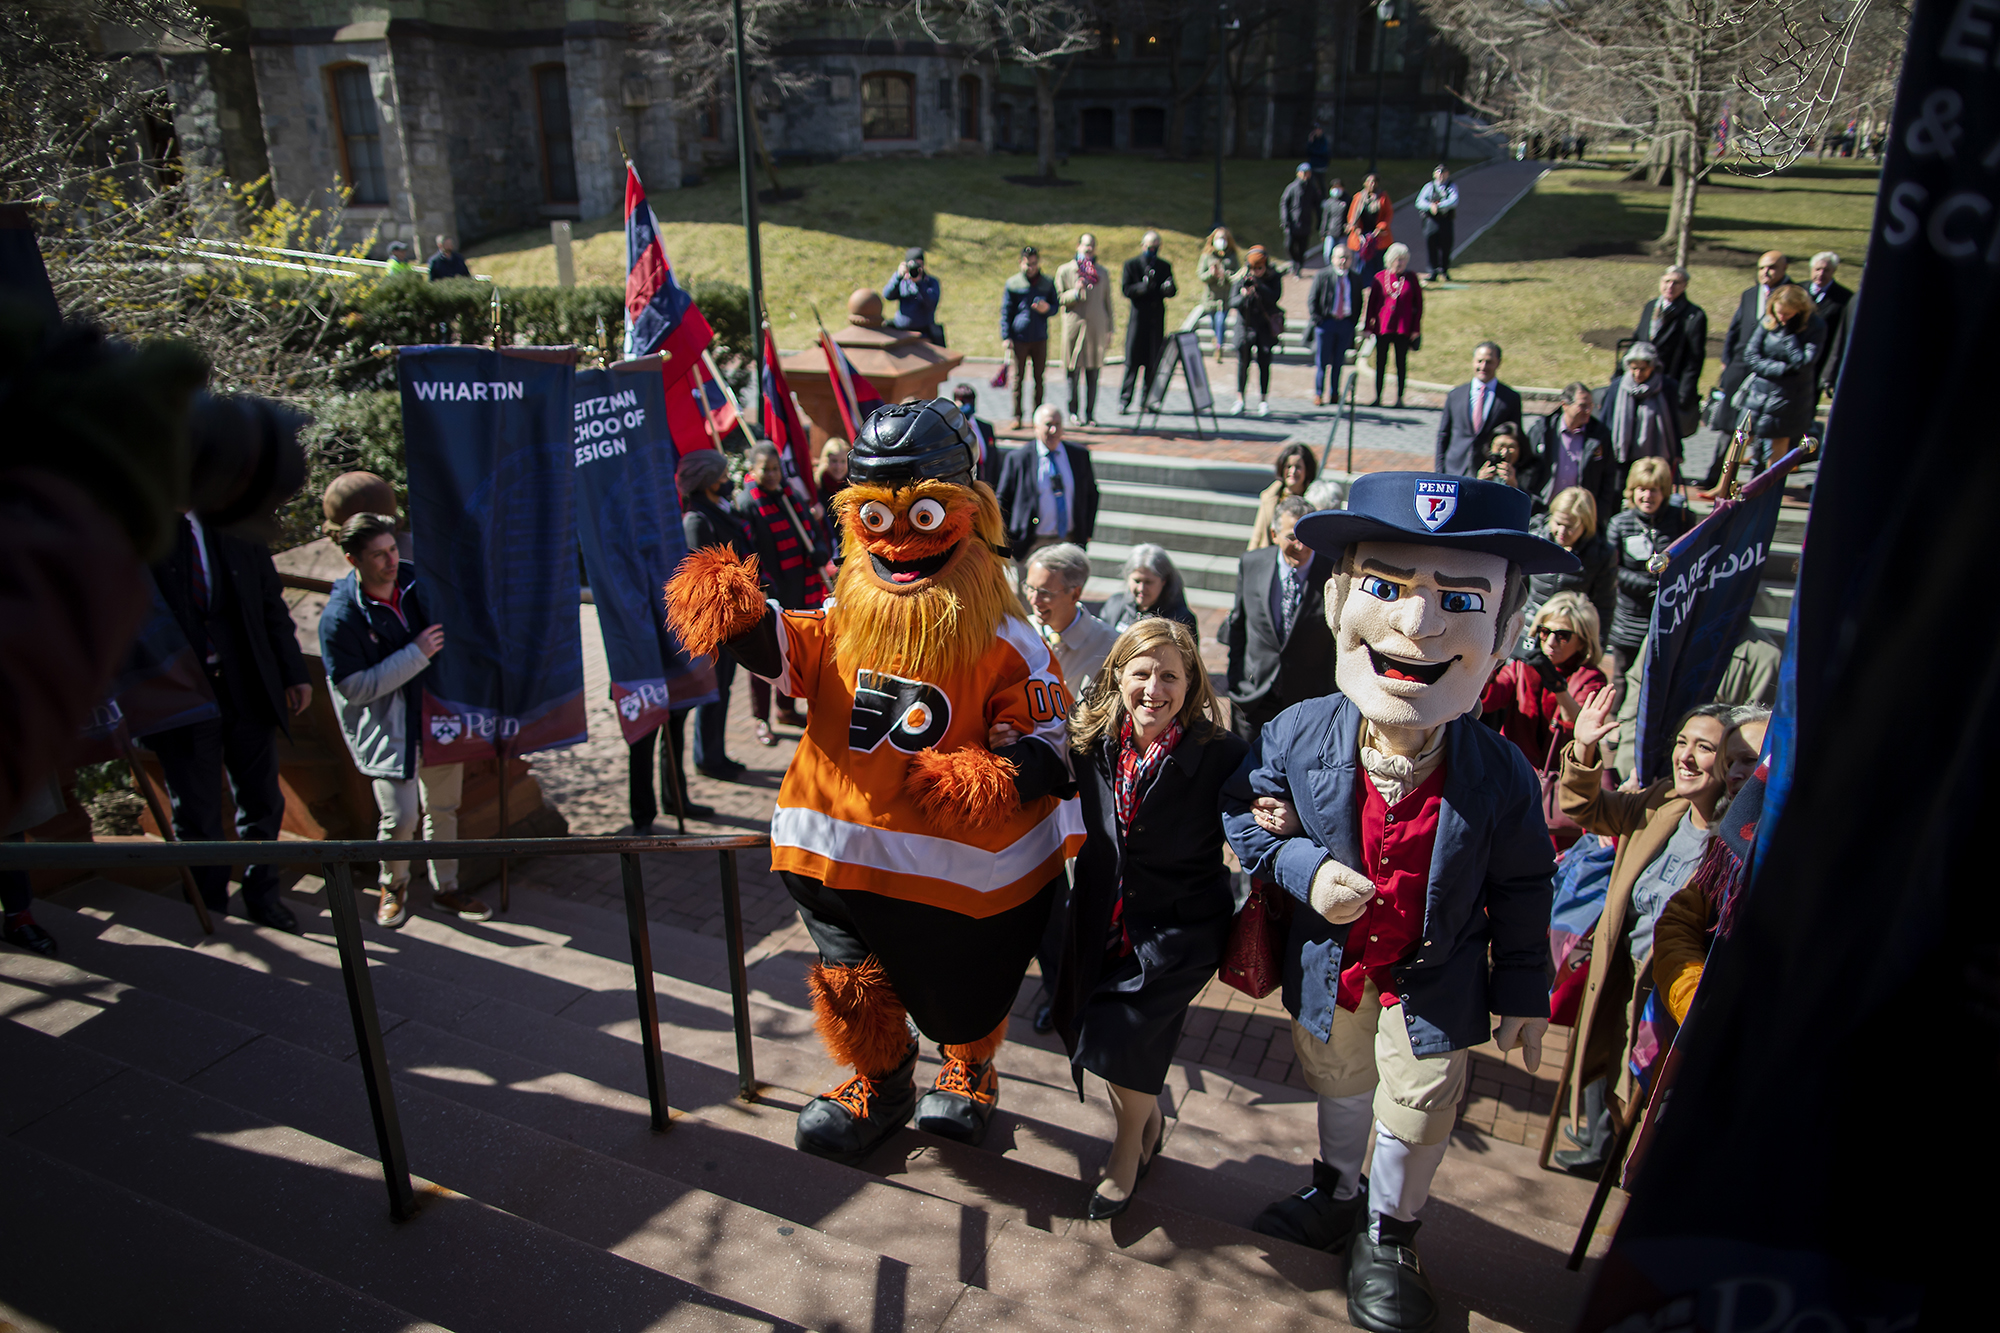 Liz Magill, Gritty, the Penn Quaker and others walk up the entryway steps to College Hall.